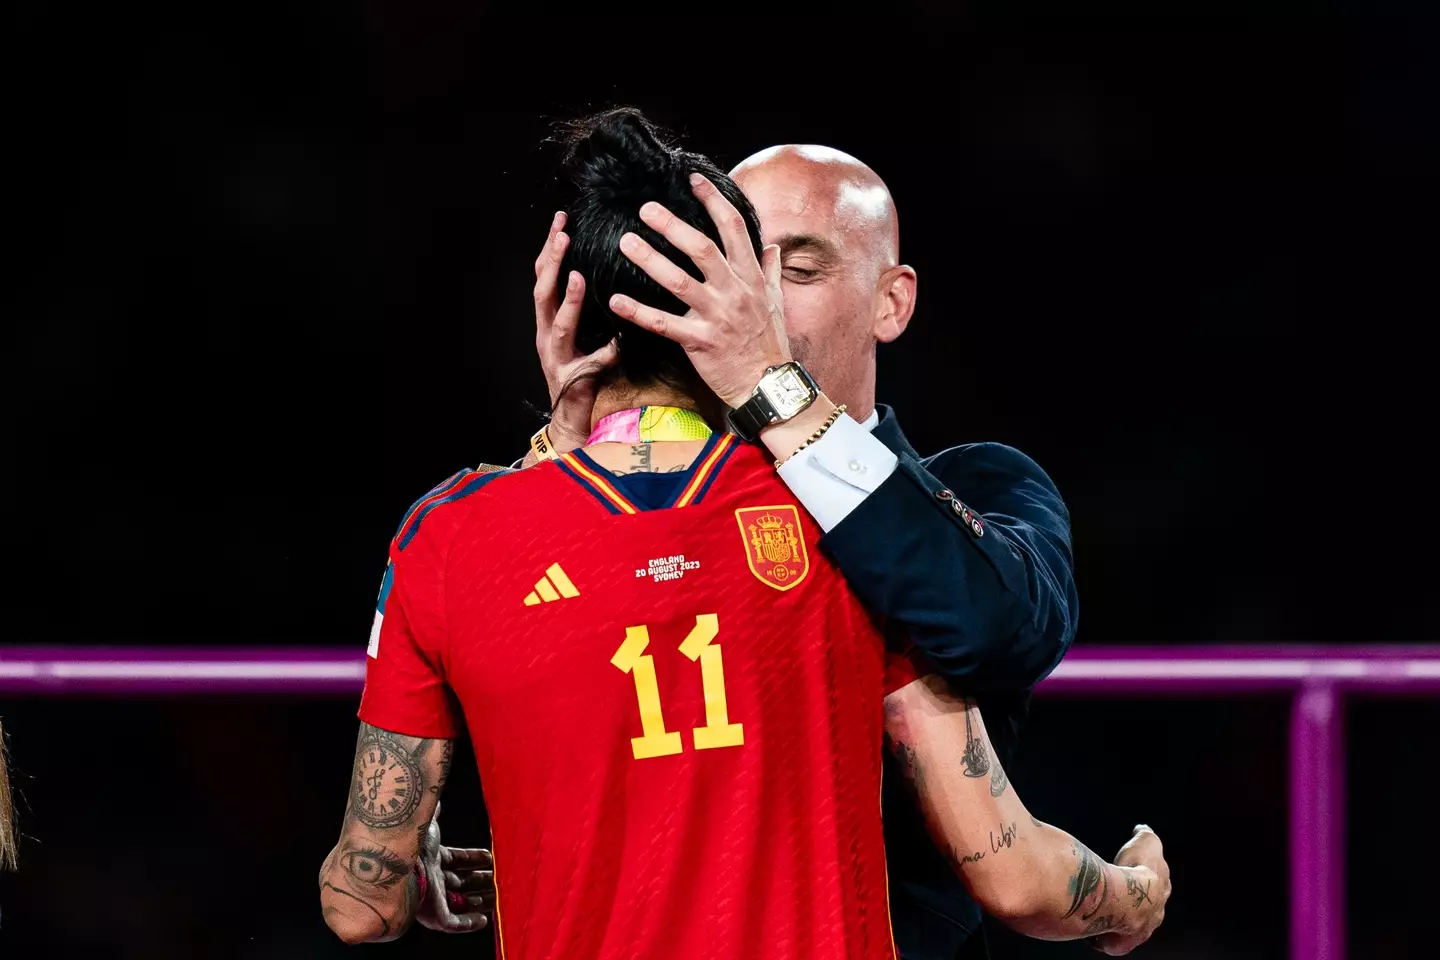 Luis Rubiales kissed Jenni Hermoso after Spain's World Cup win.